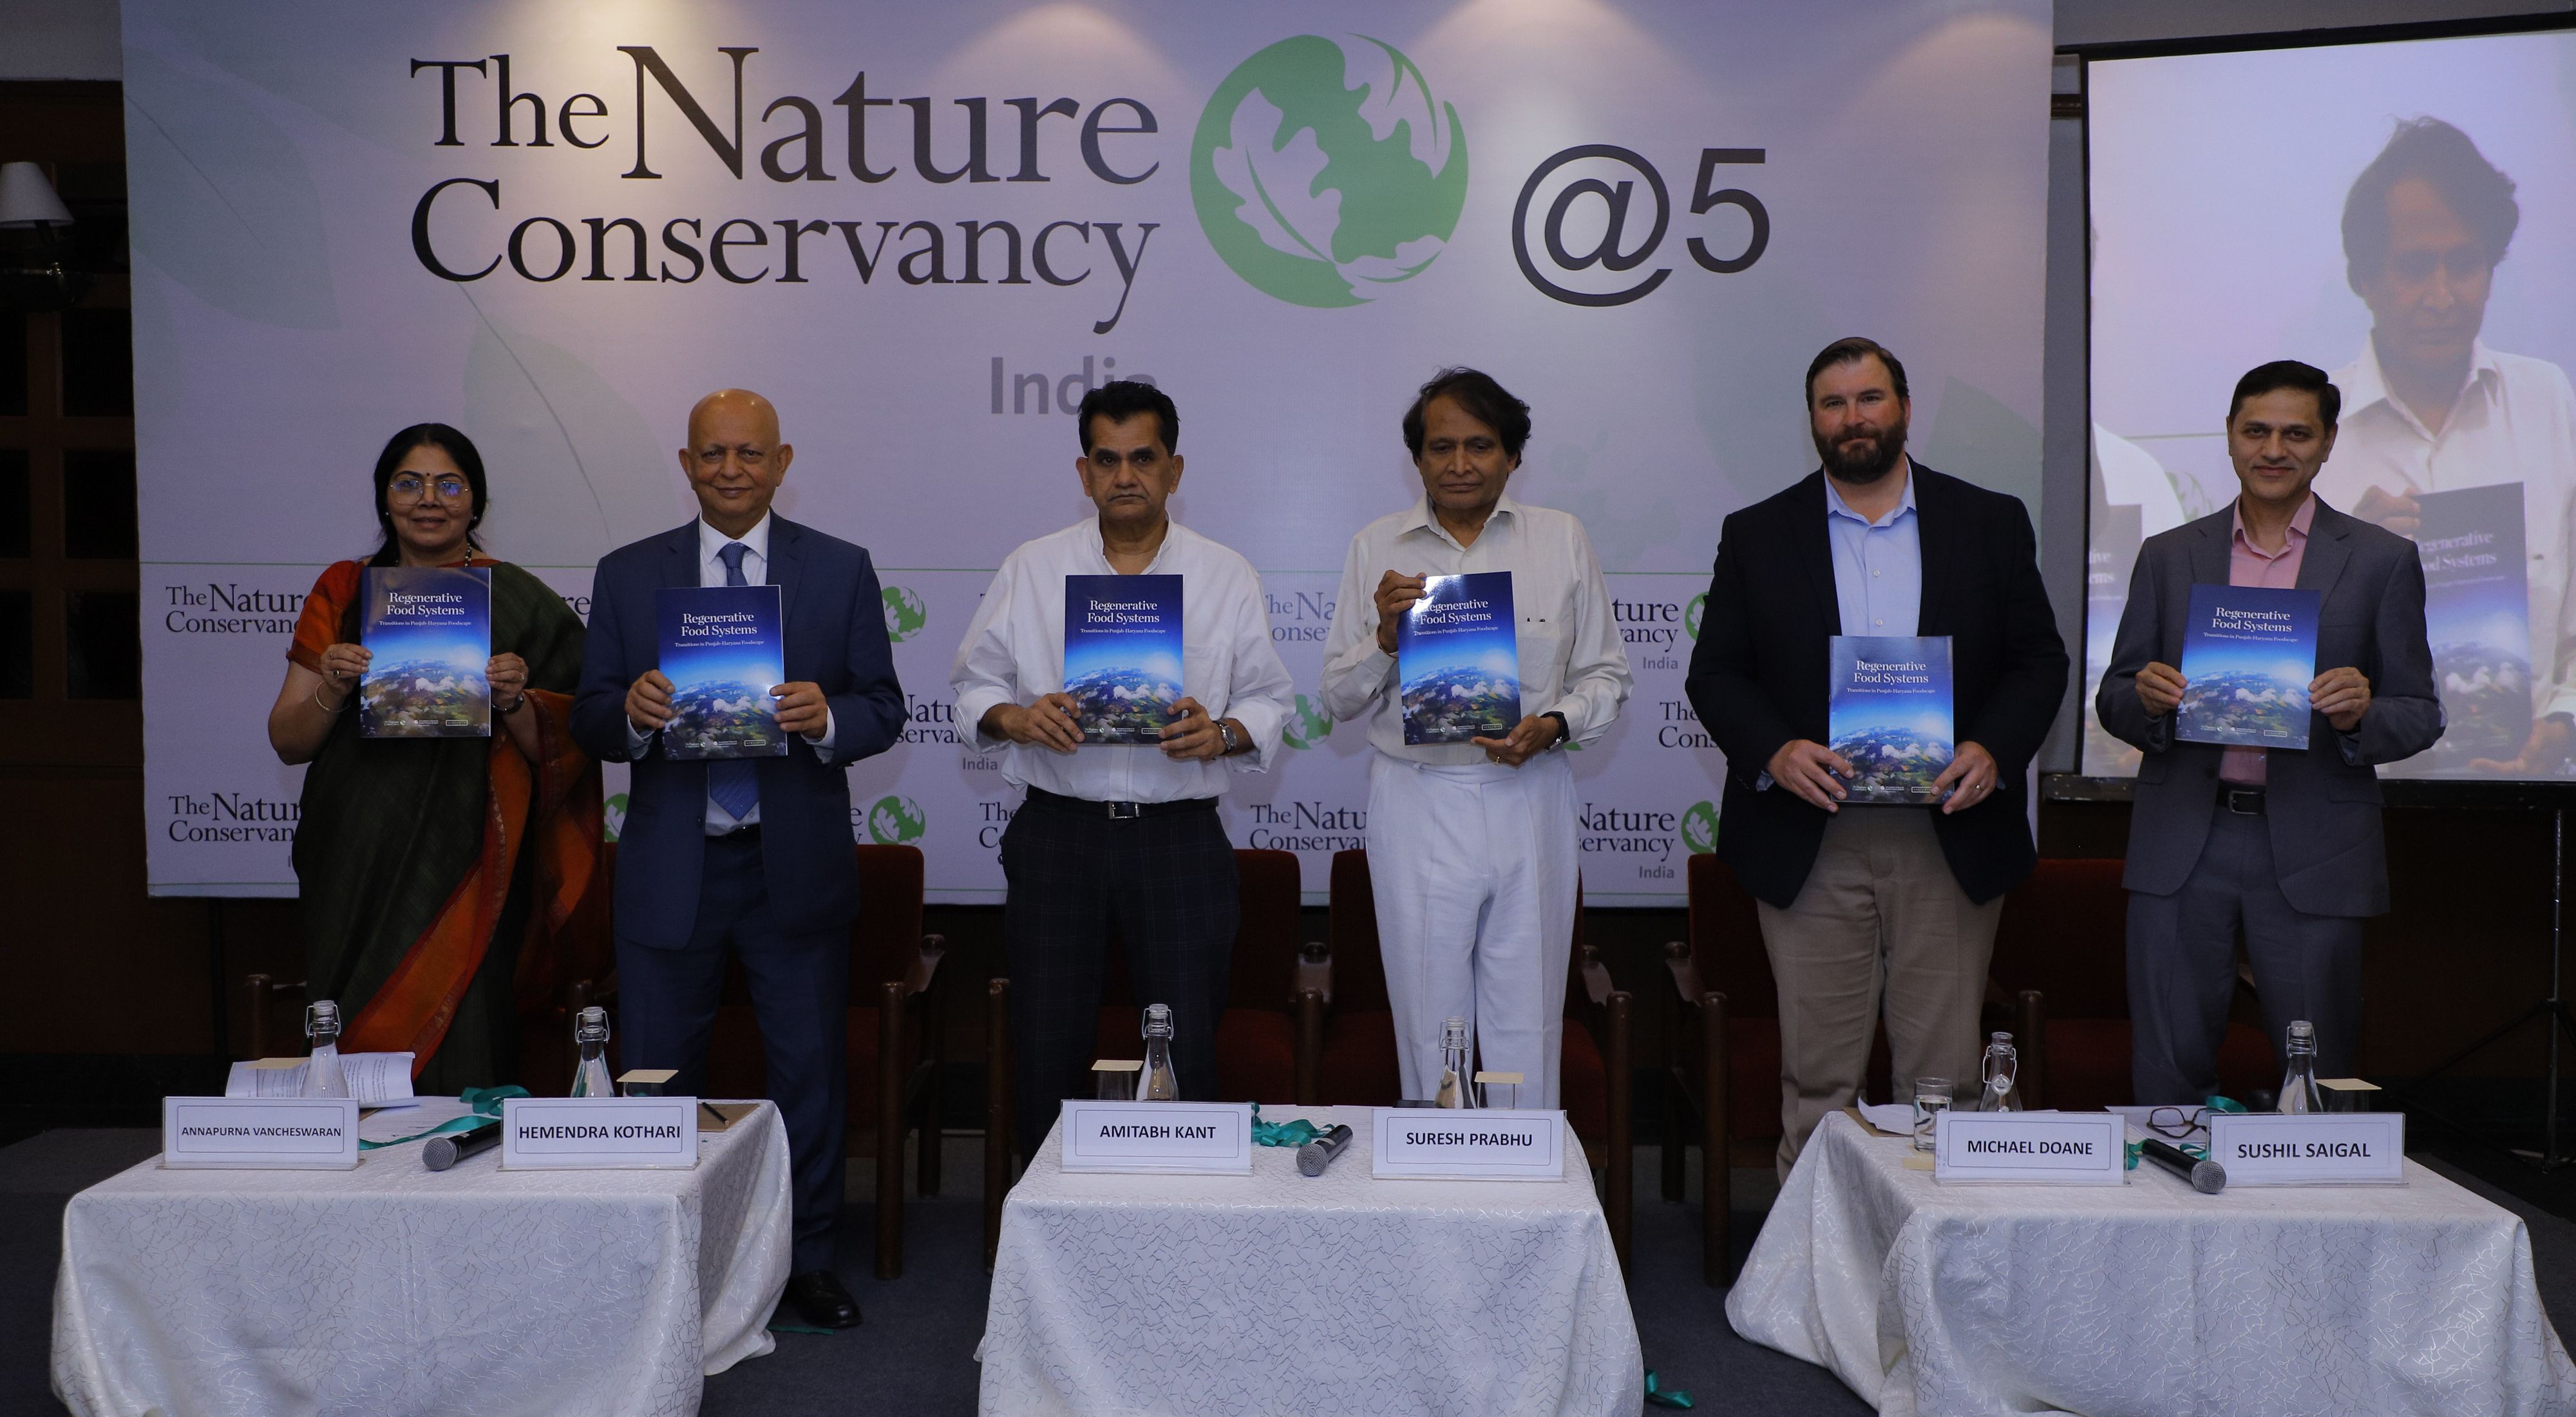 Global Foodscapes Report – Towards Food System Transition in India